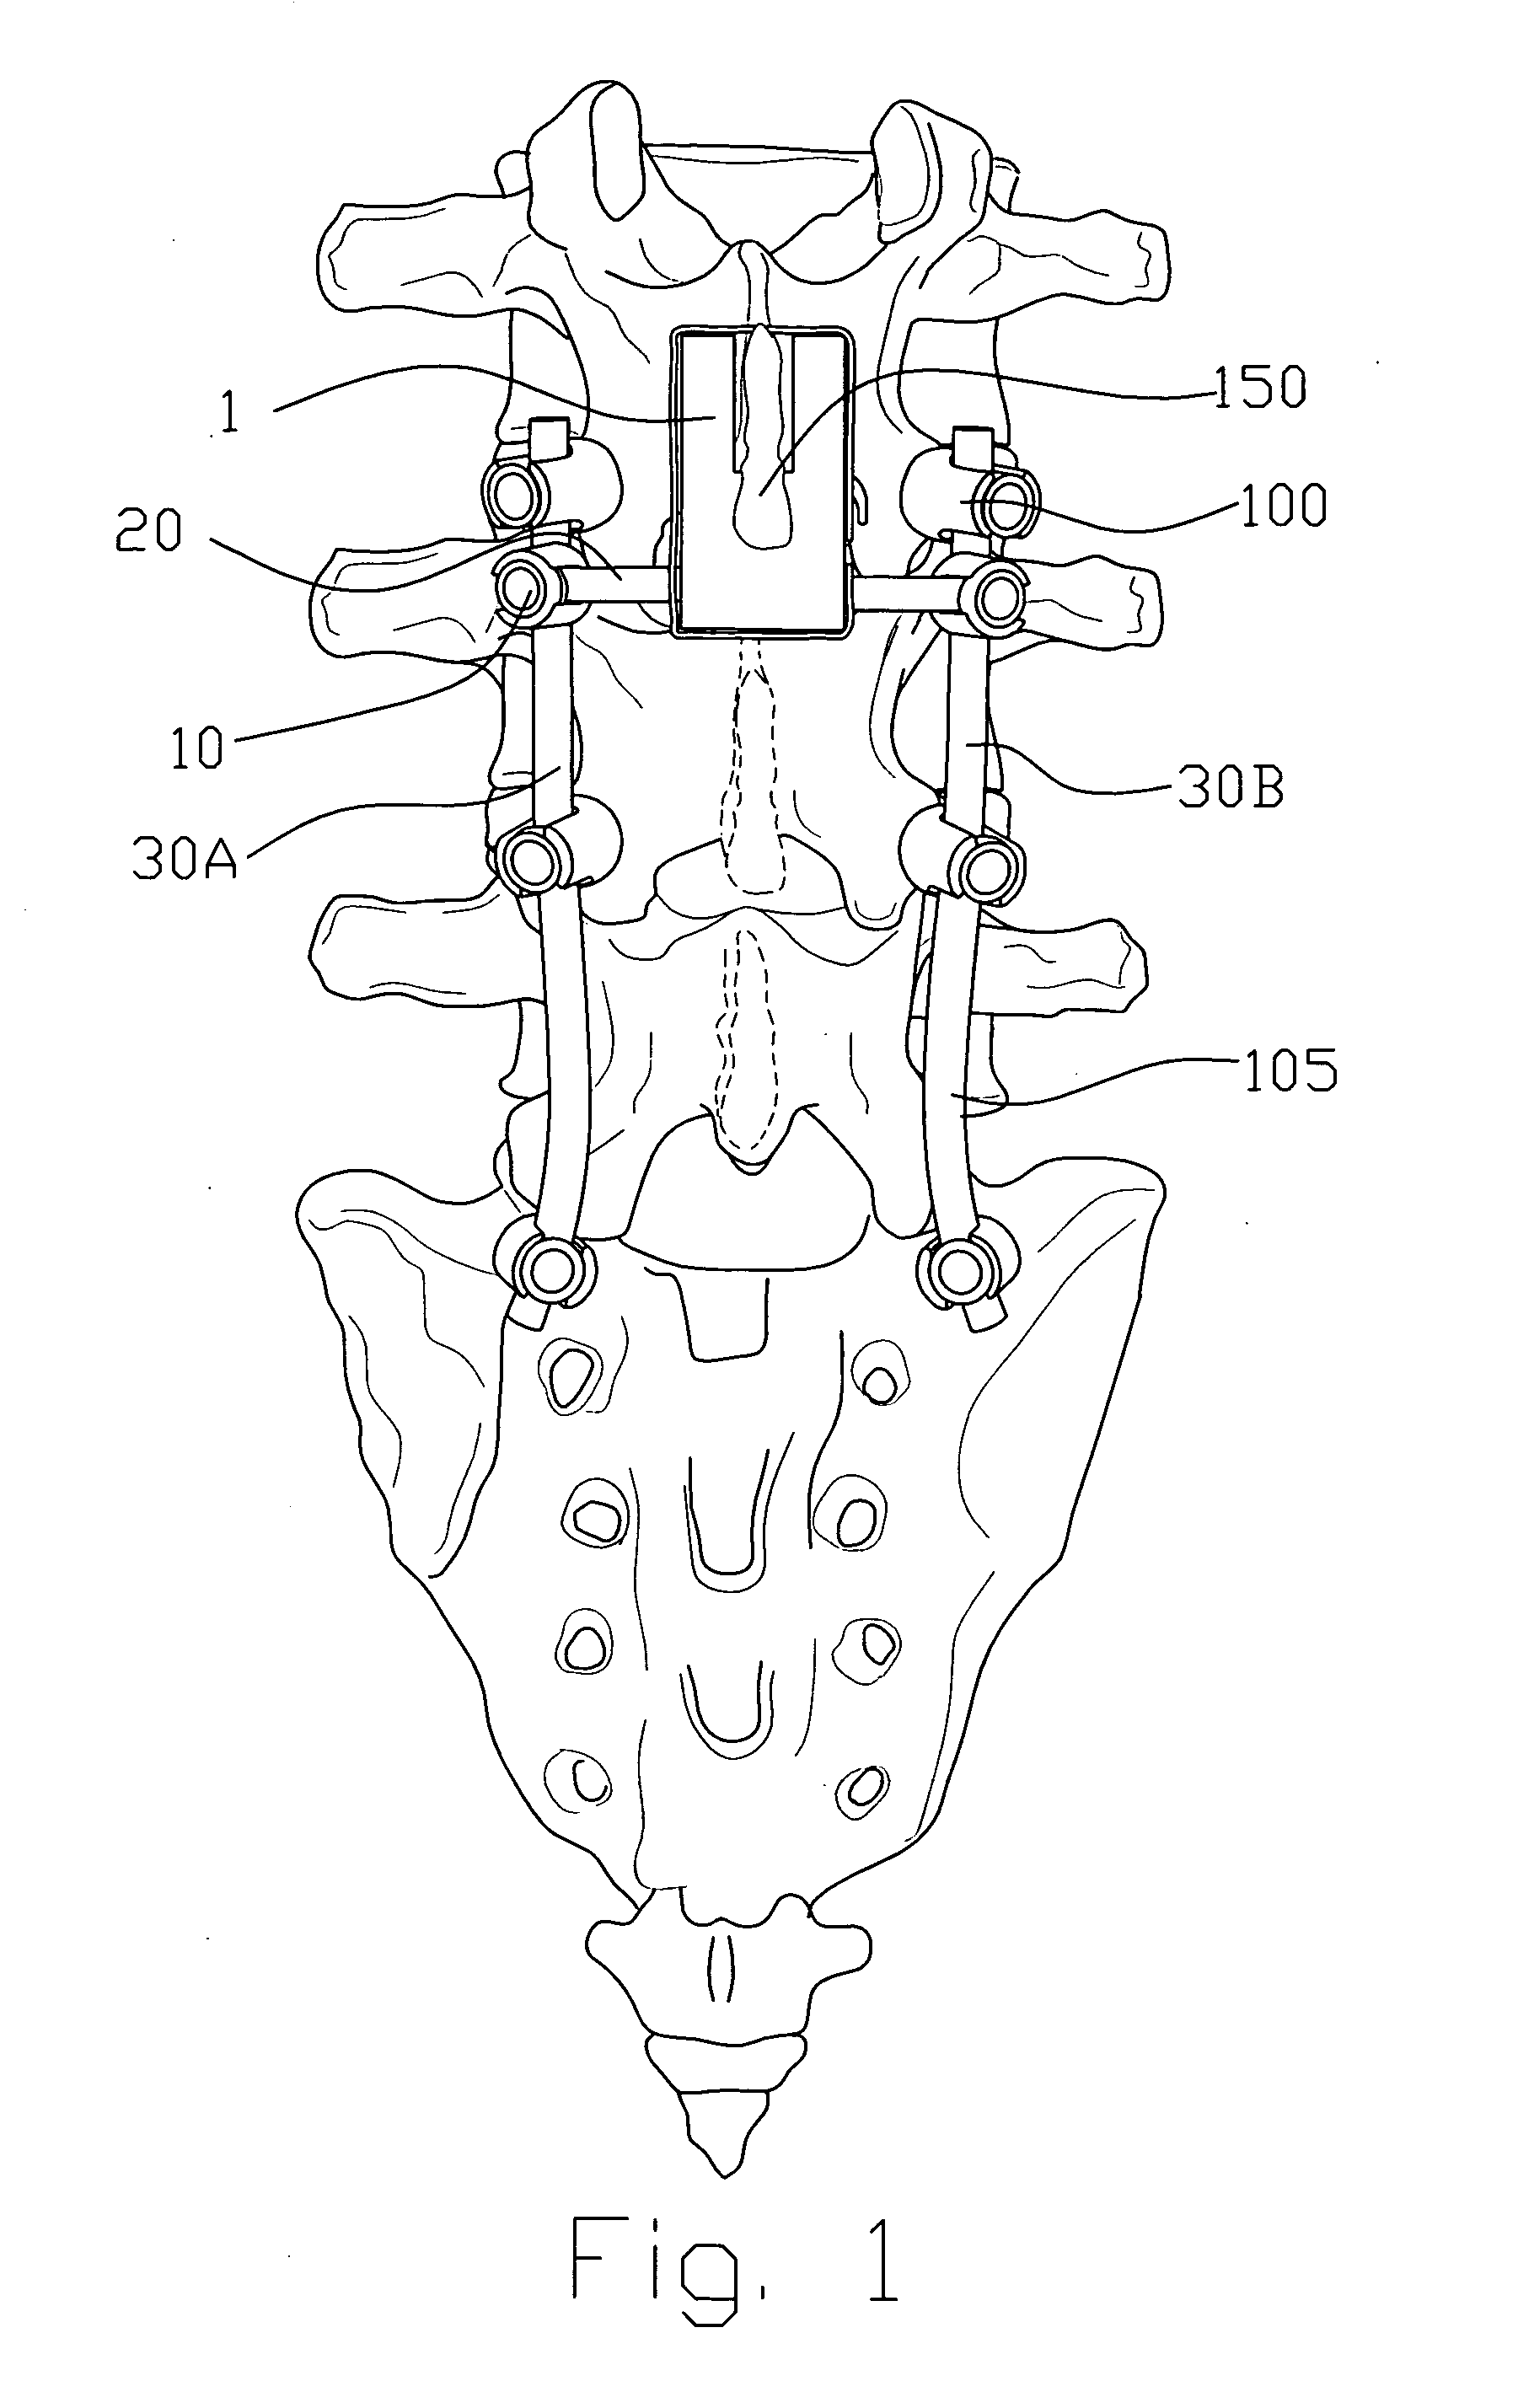 Spinal implant device, procedure and system